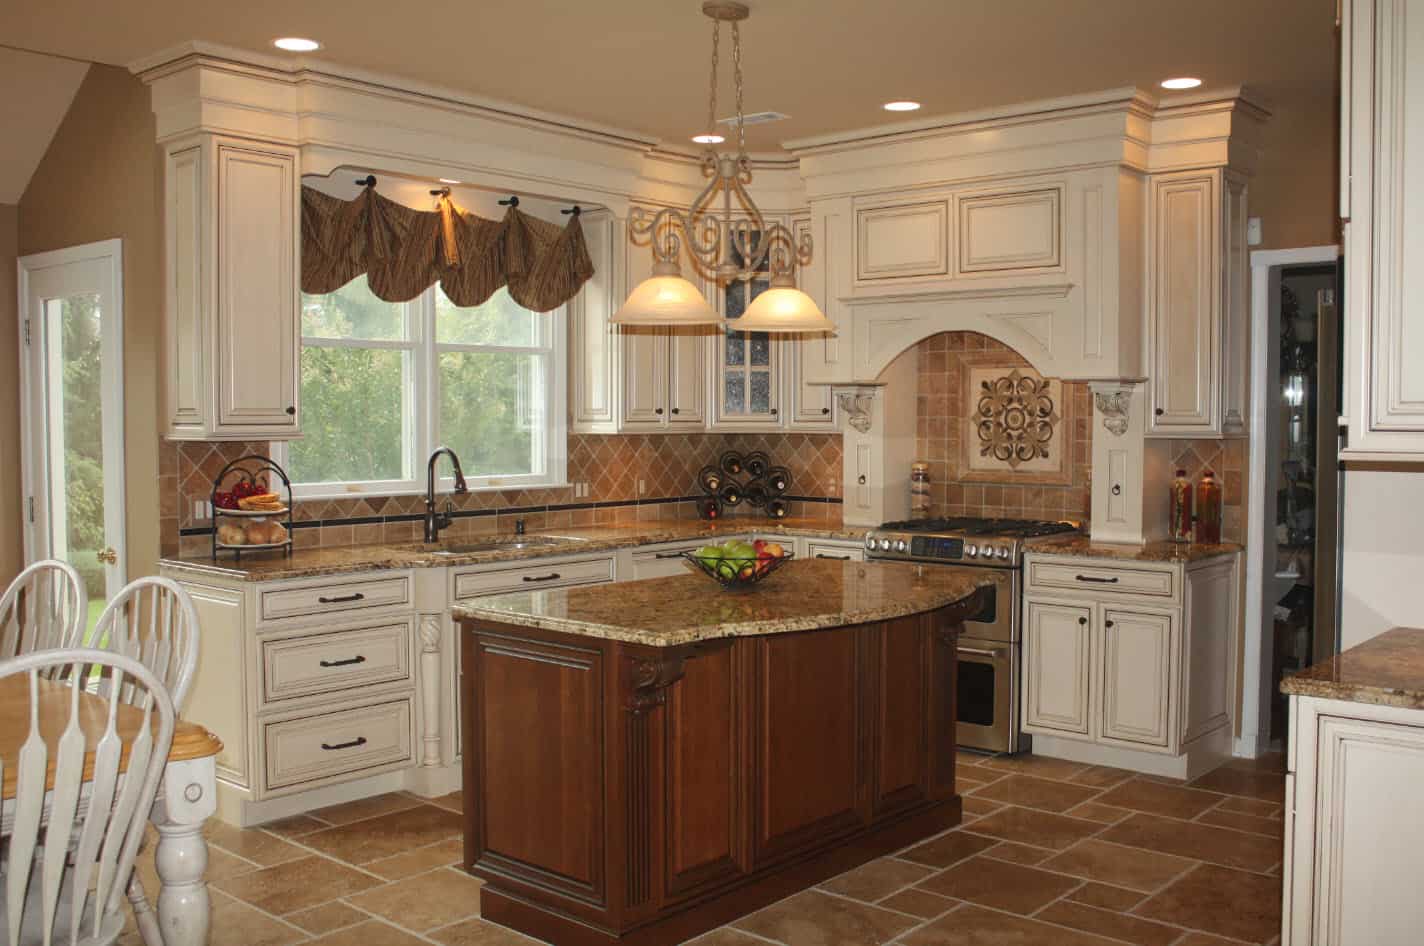 Sycamore Kitchens & More of Newtown, PA Receives Remodeling & Design